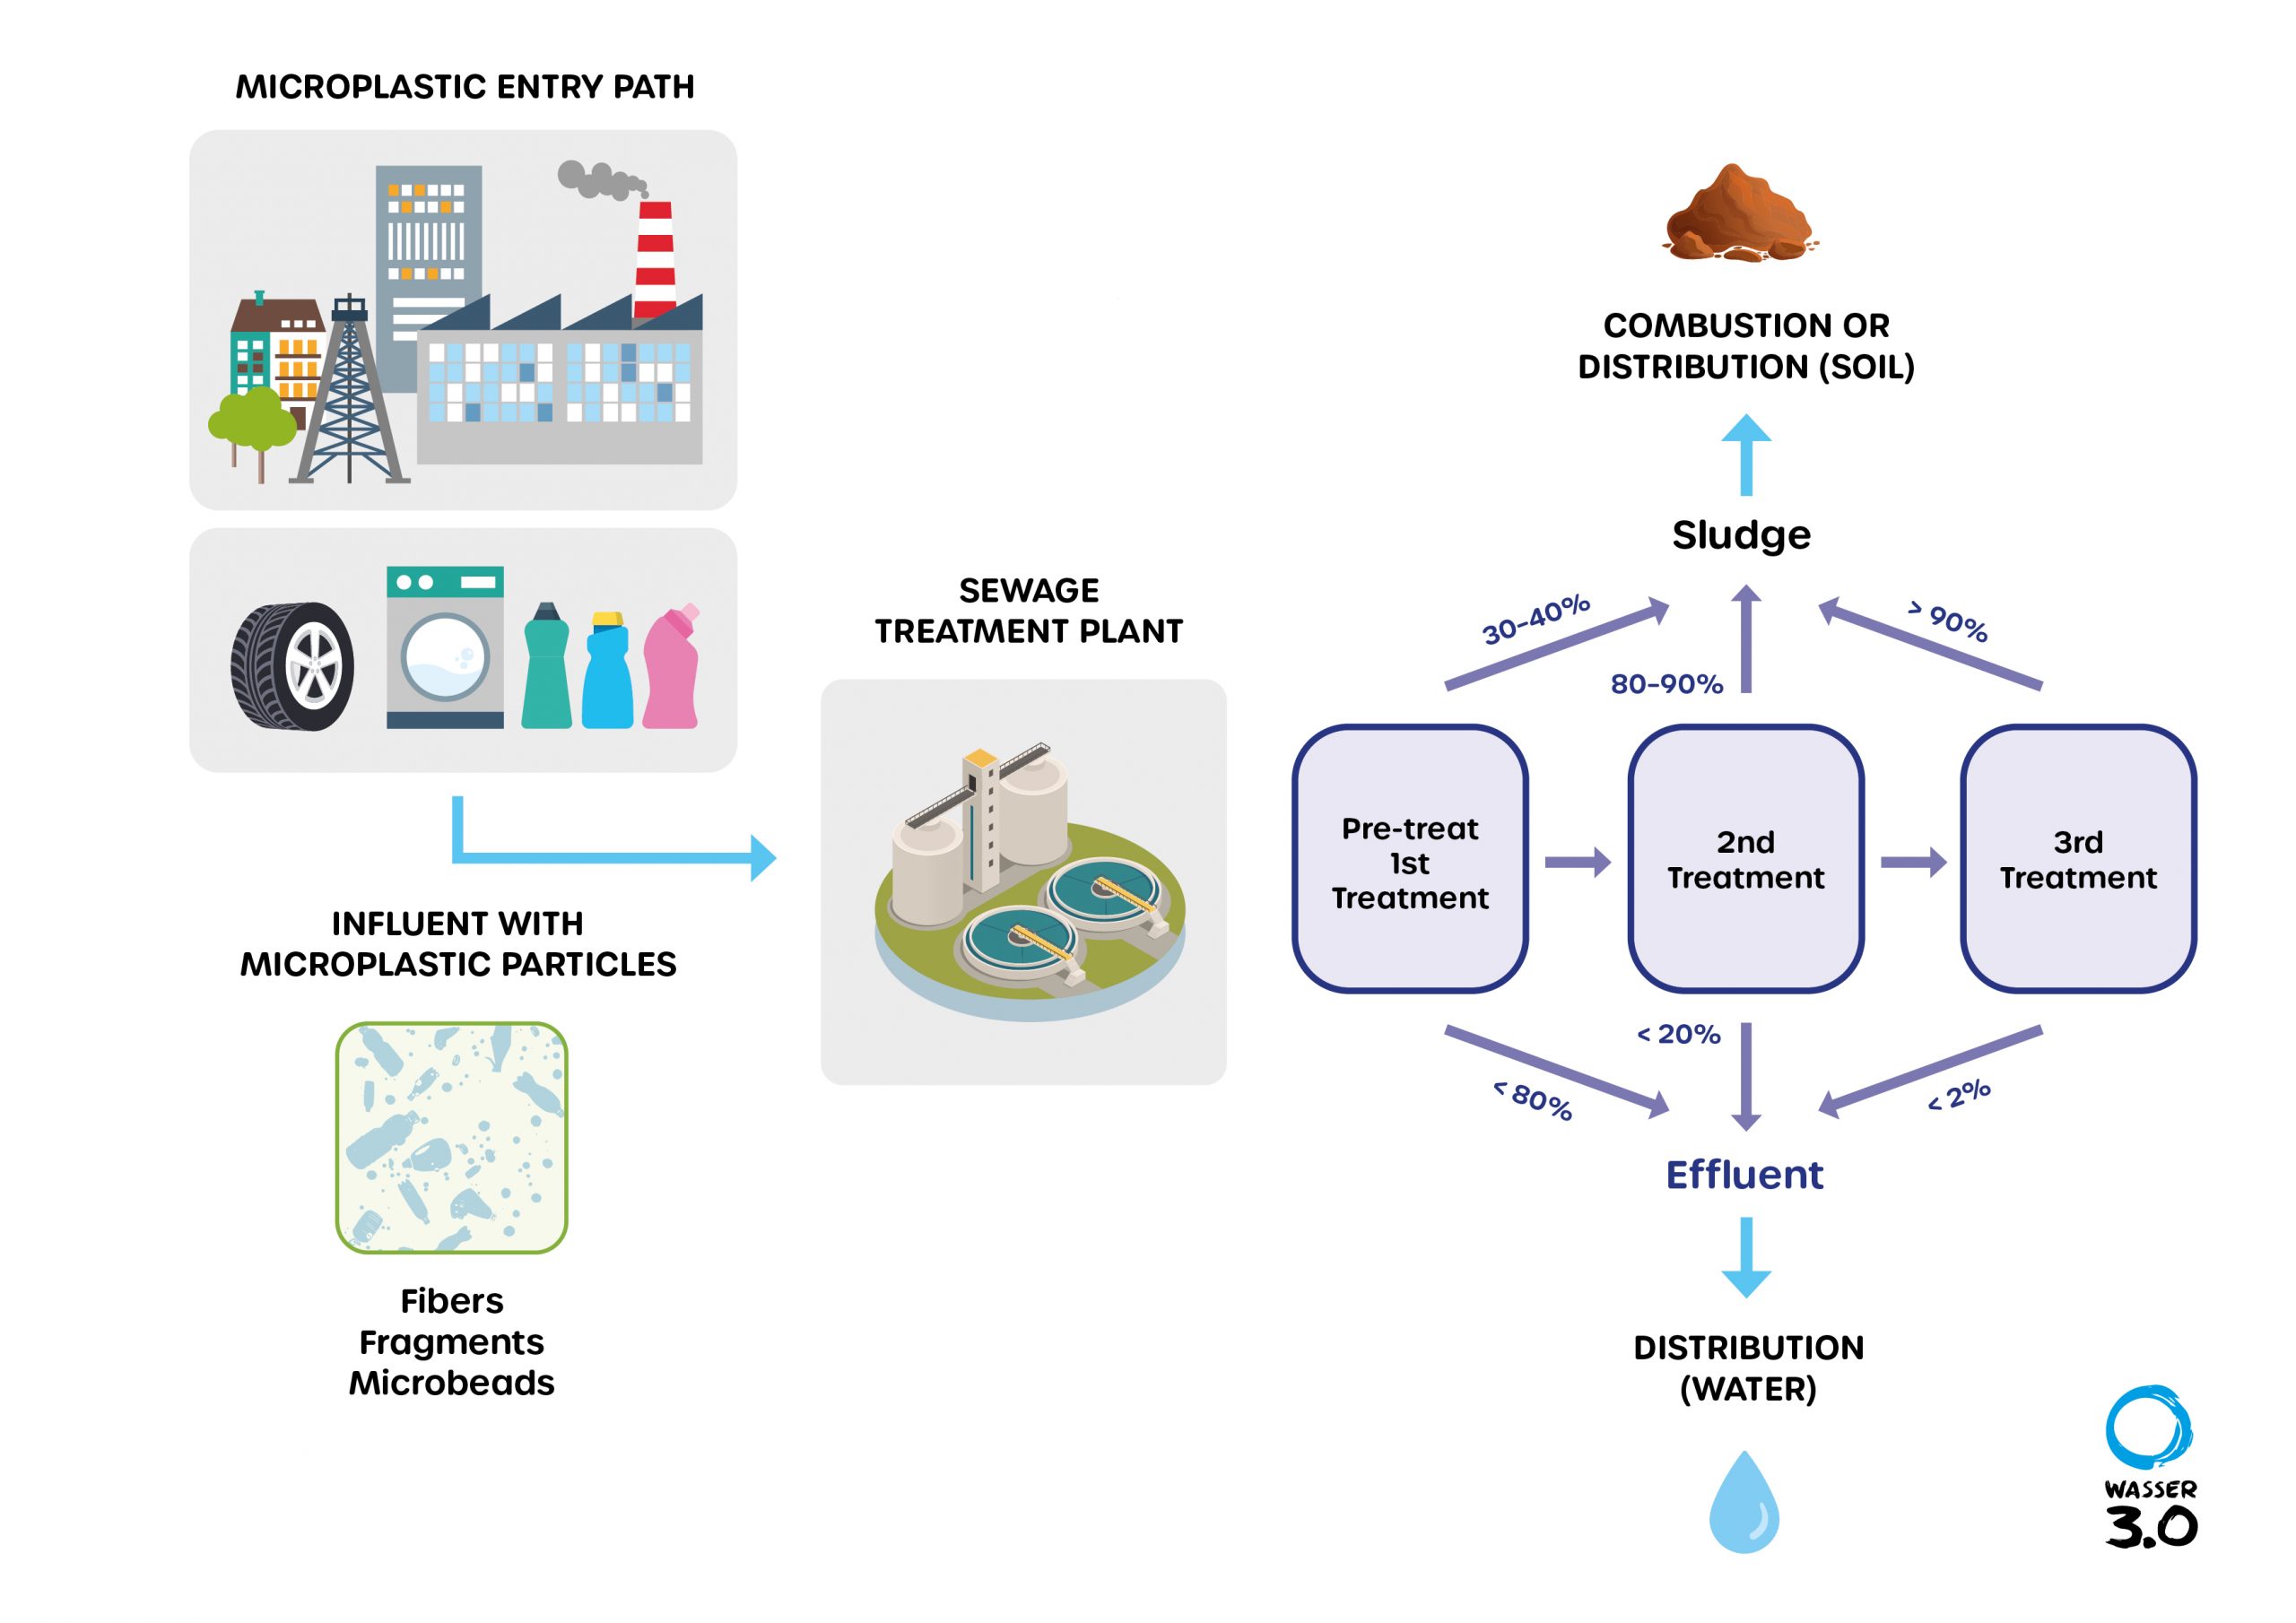 Removal options for microplastics in a standard wastewater treatment plant.